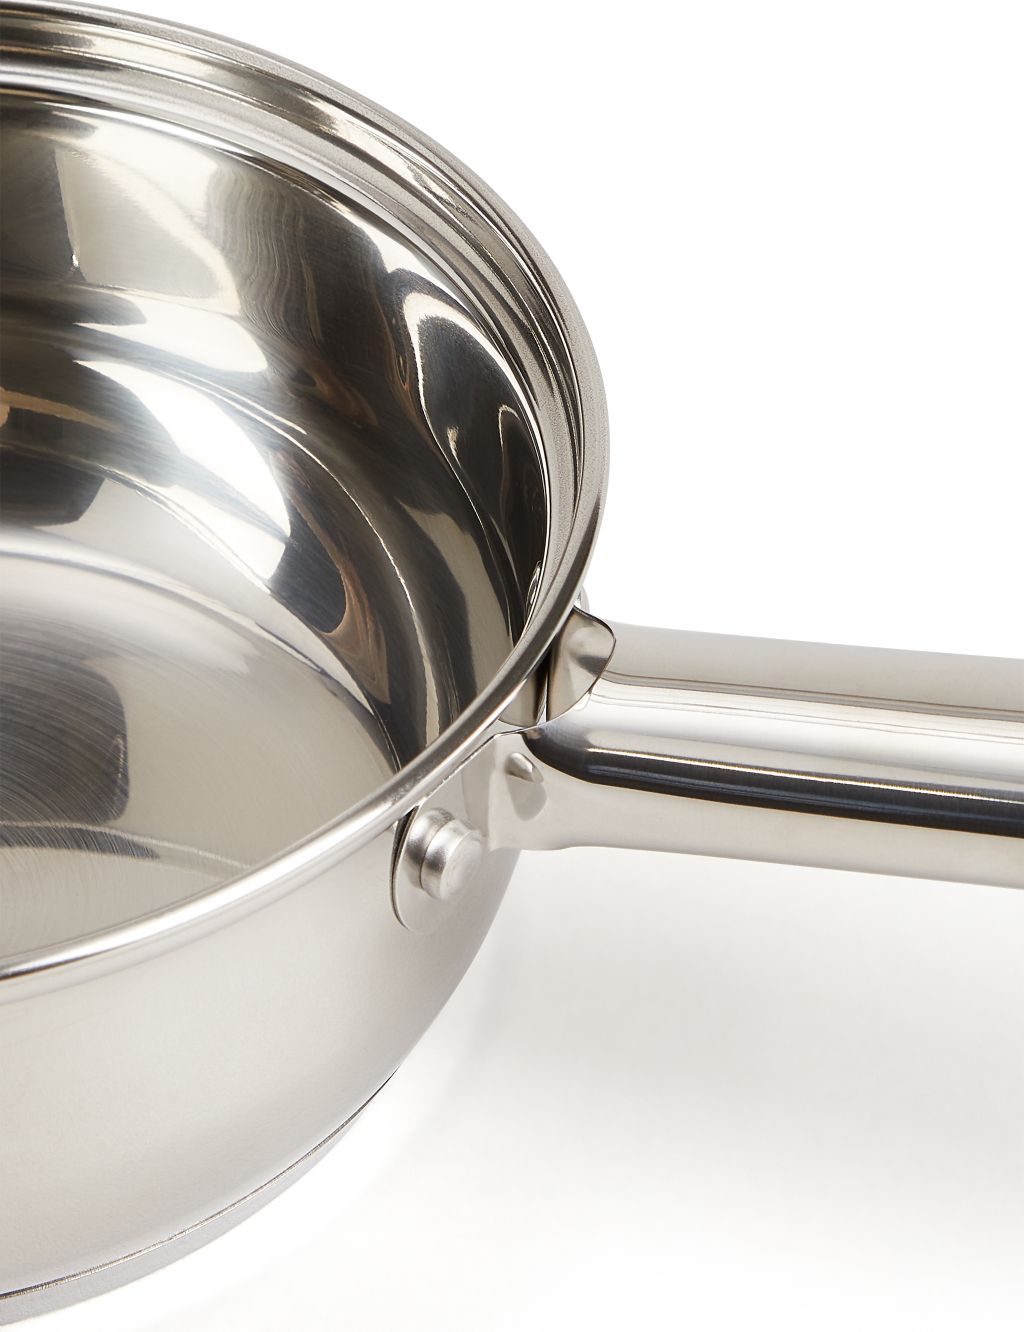 3 Piece Stainless Steel Pan Set 2 of 4